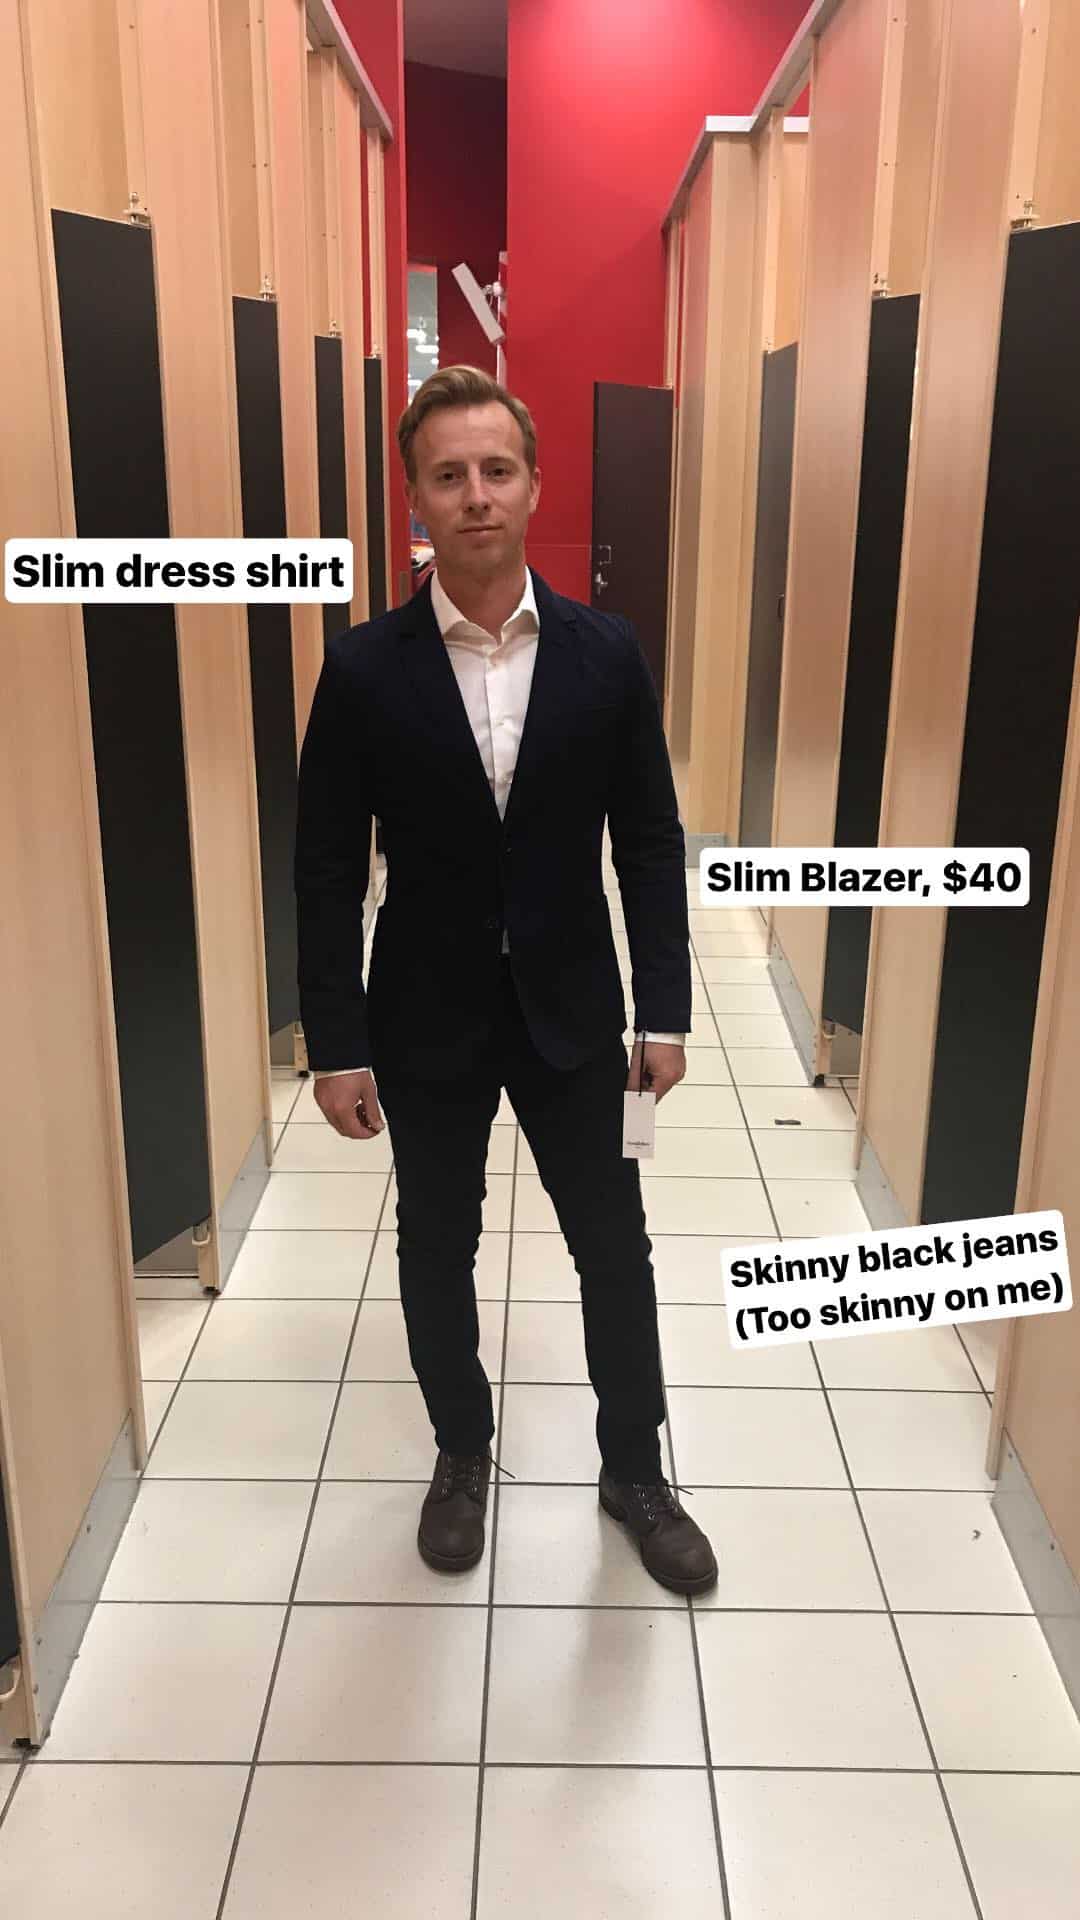 Man in fitting room wearing dress shirt, blazer and skinny jeans